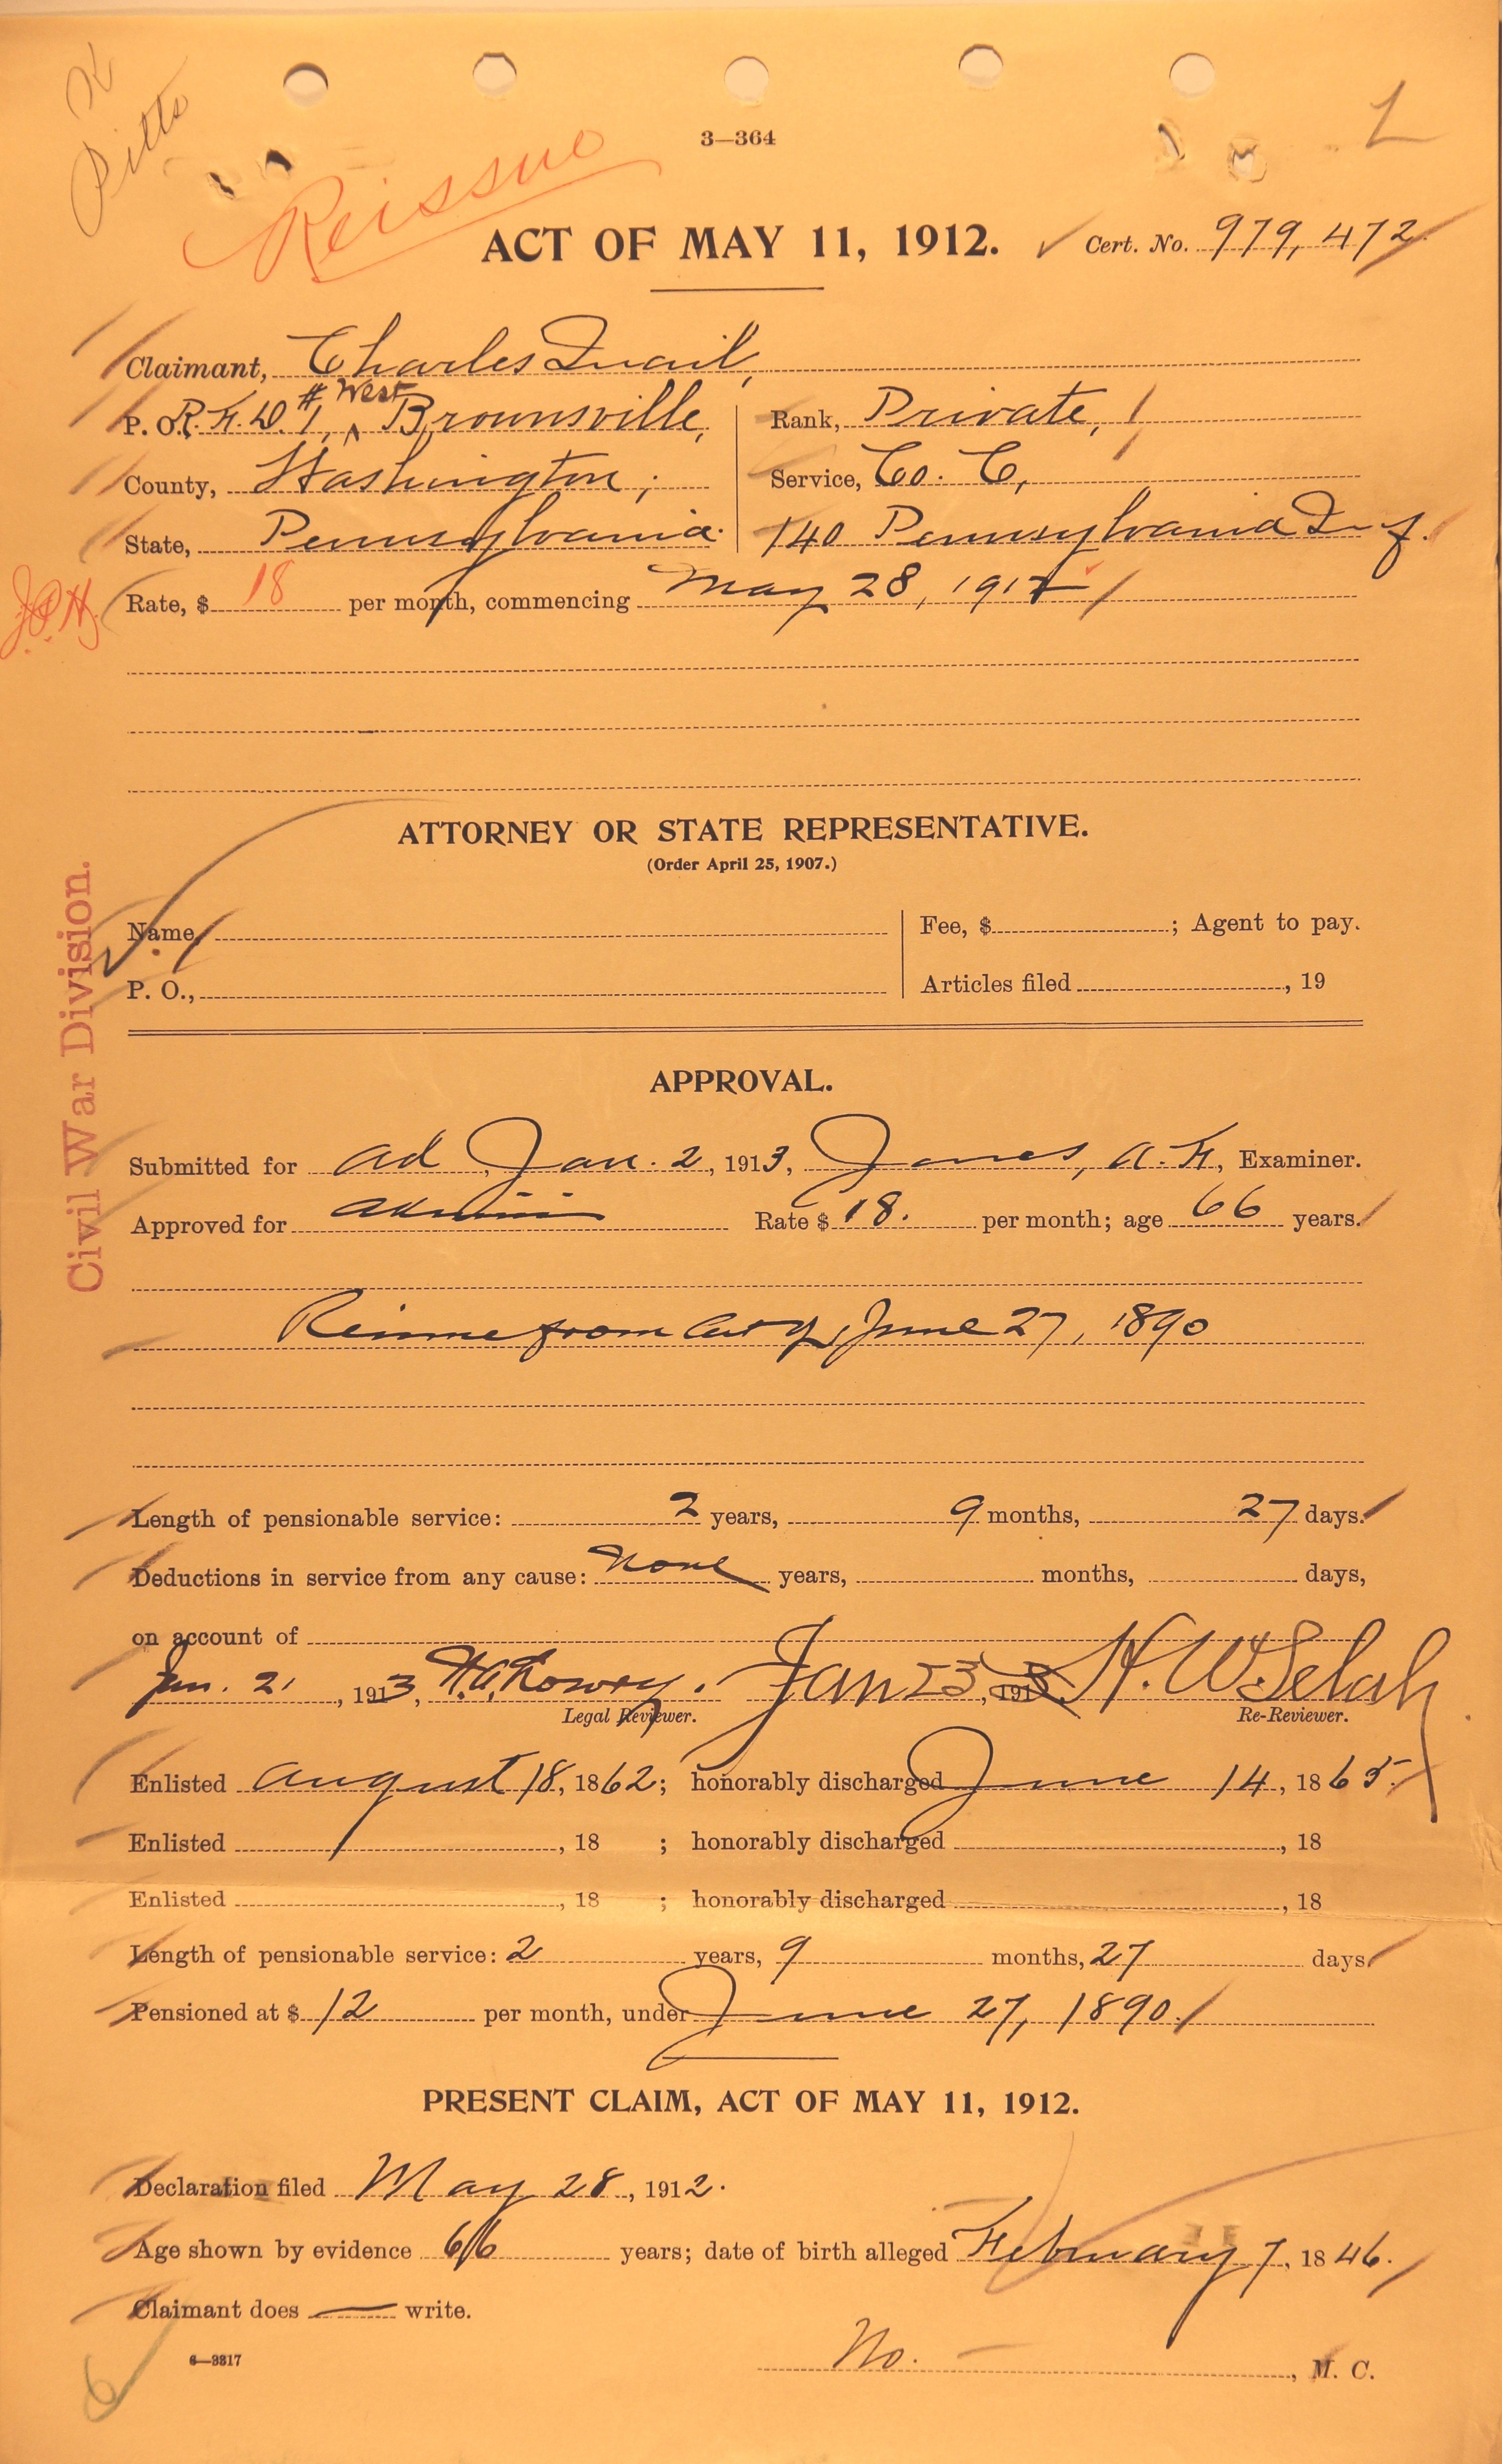 A ruling reissuing a recruit's pension under the act of May 11, 1912